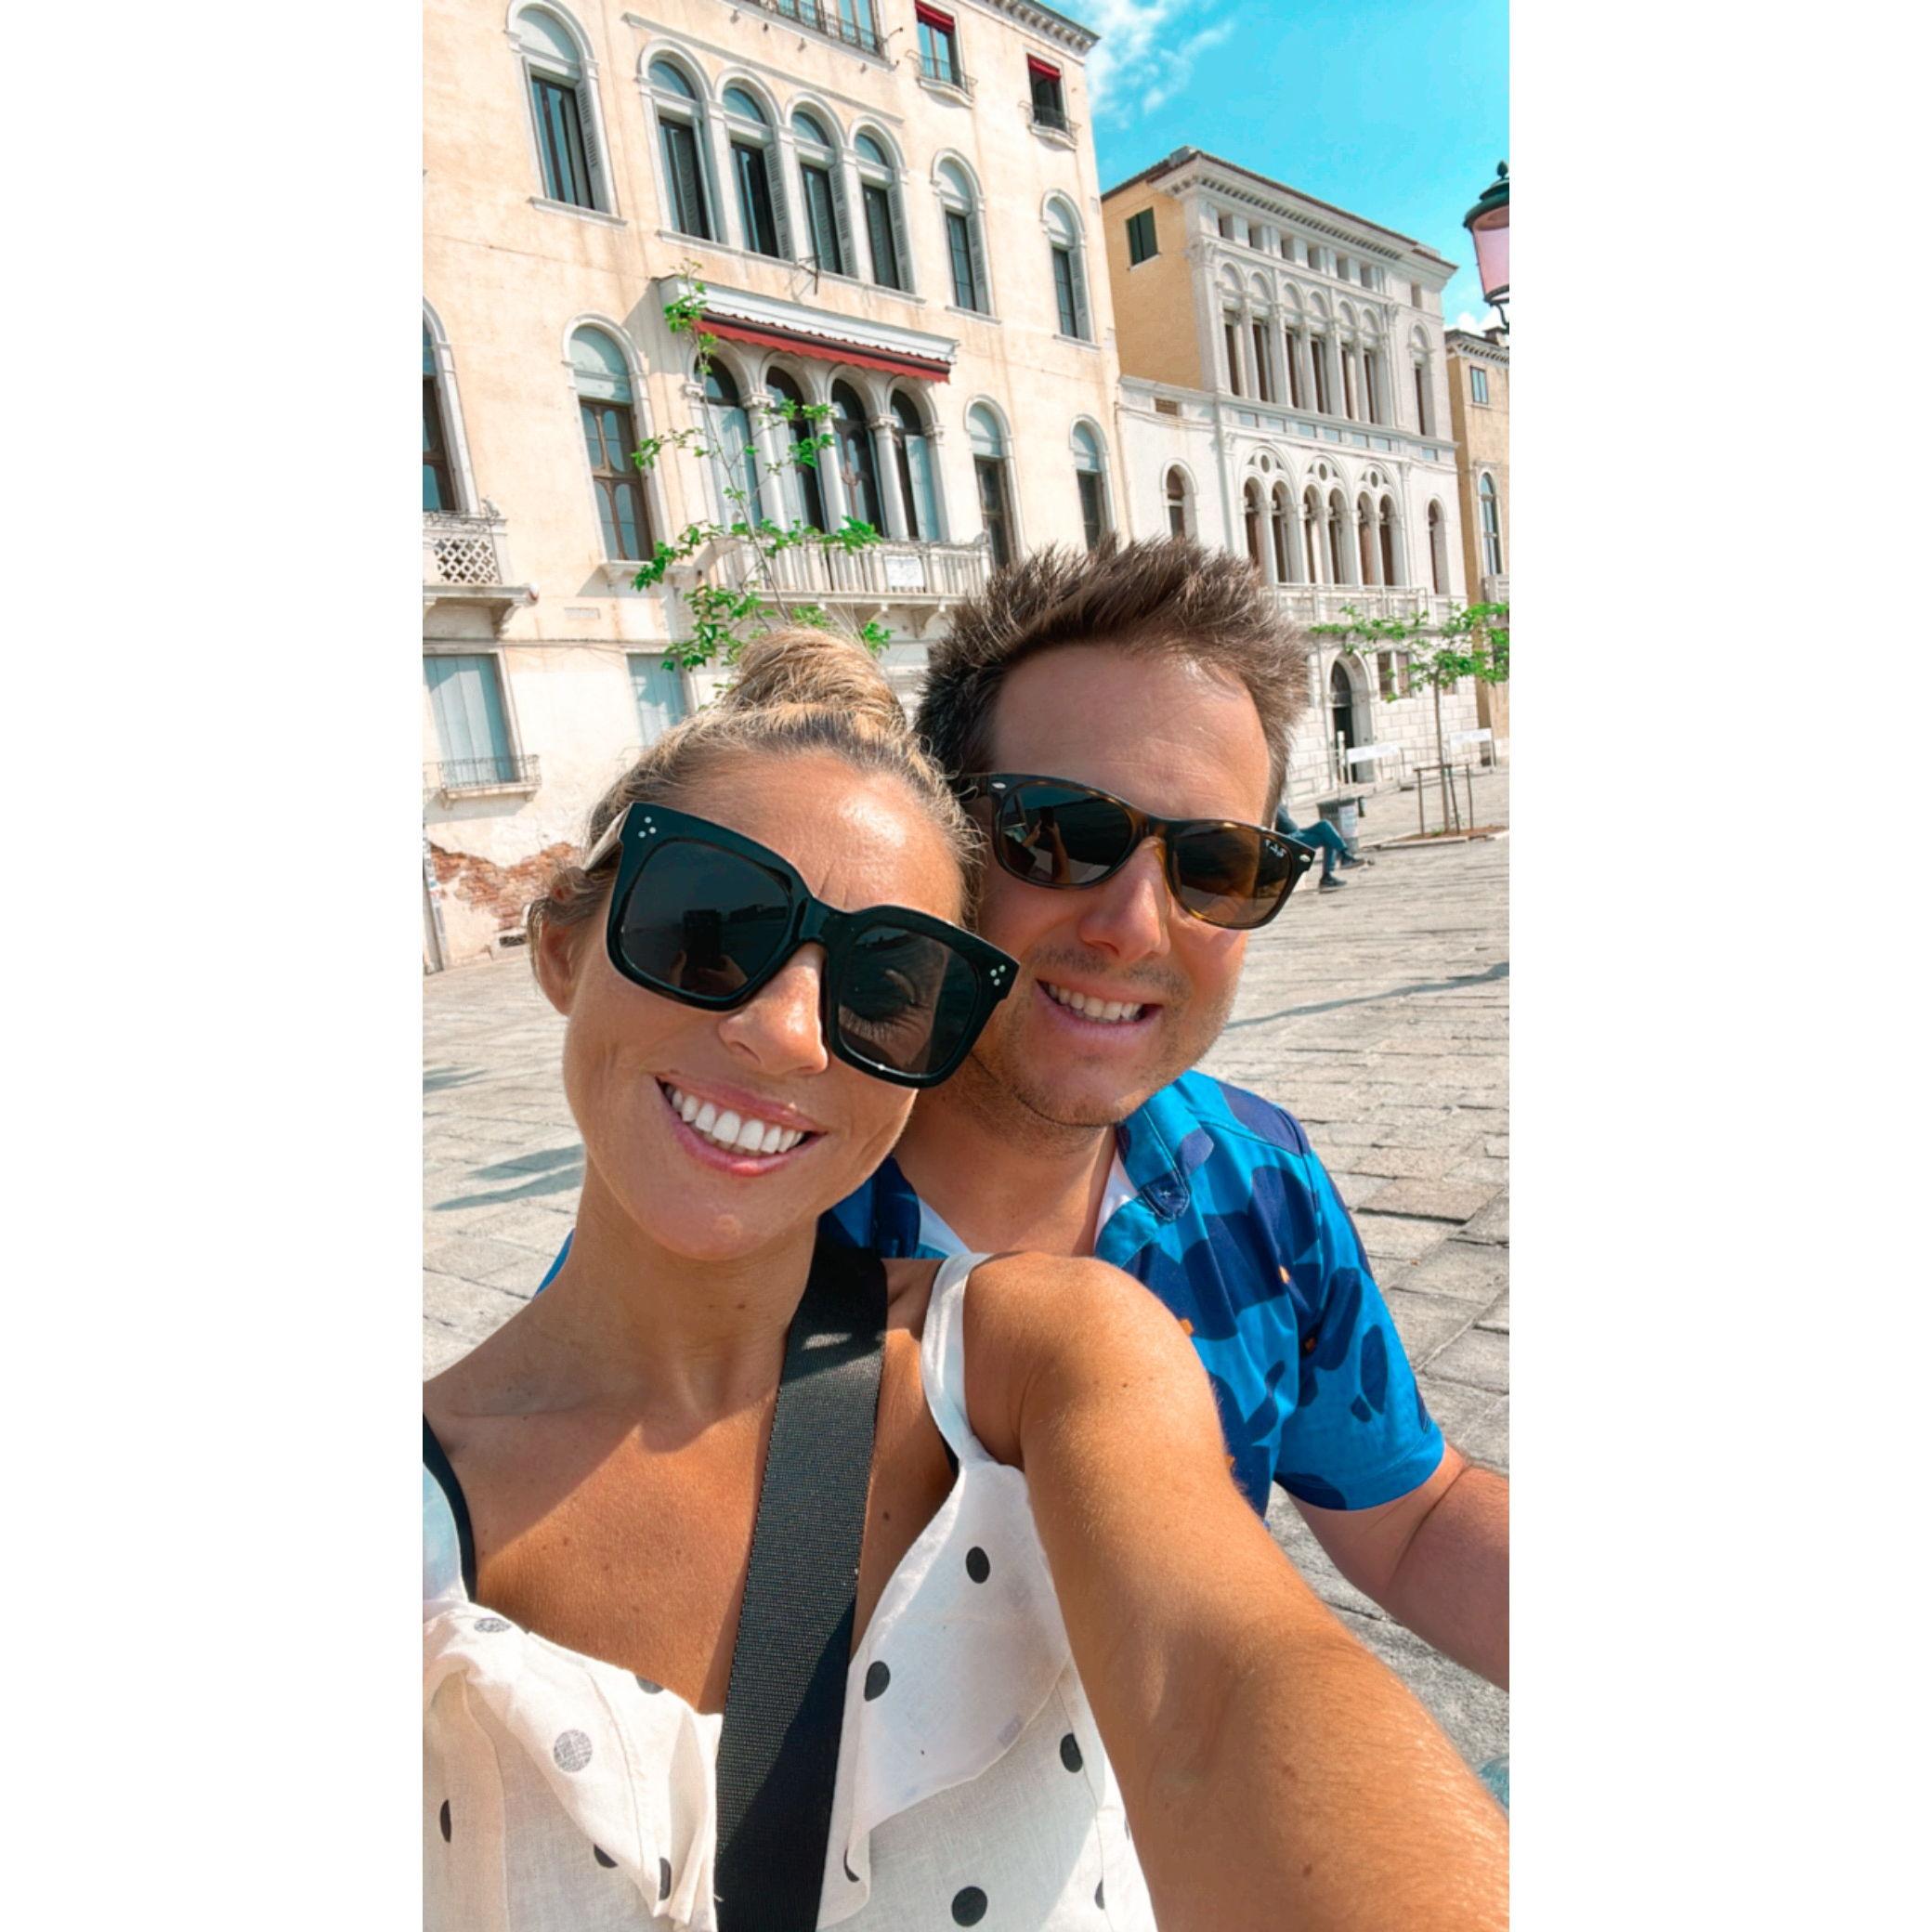 Traveled to Italy together!